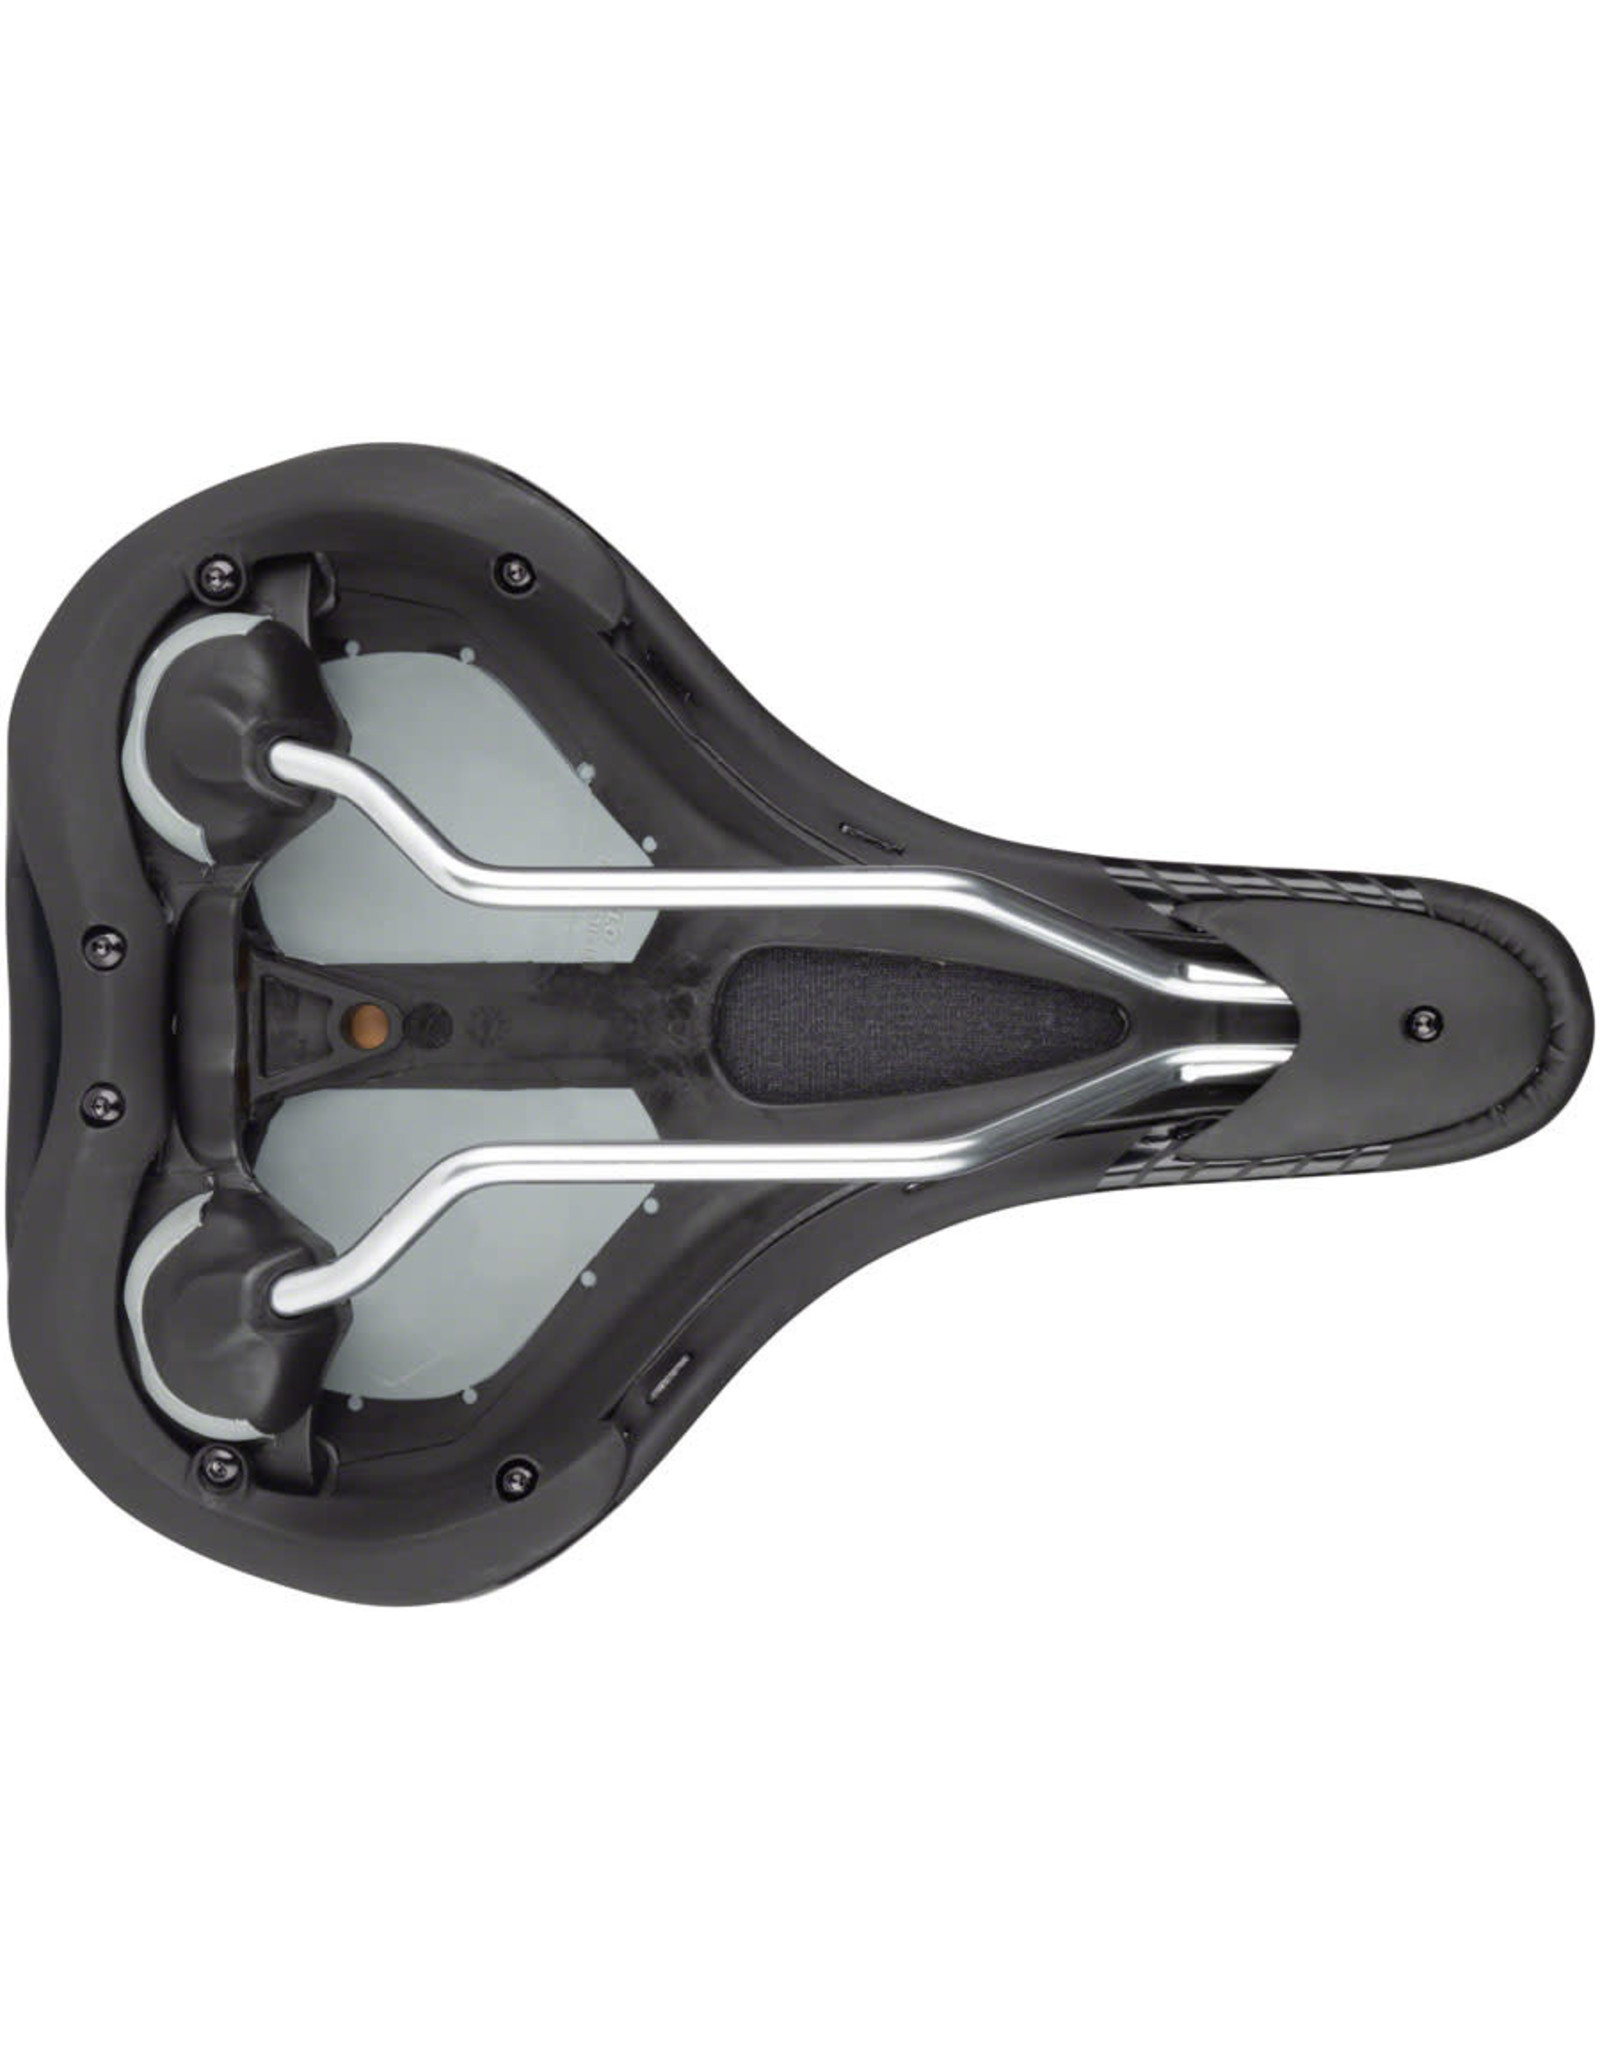 MSW MSW SDL-192 Relax Recreation Saddle - Steel, Black